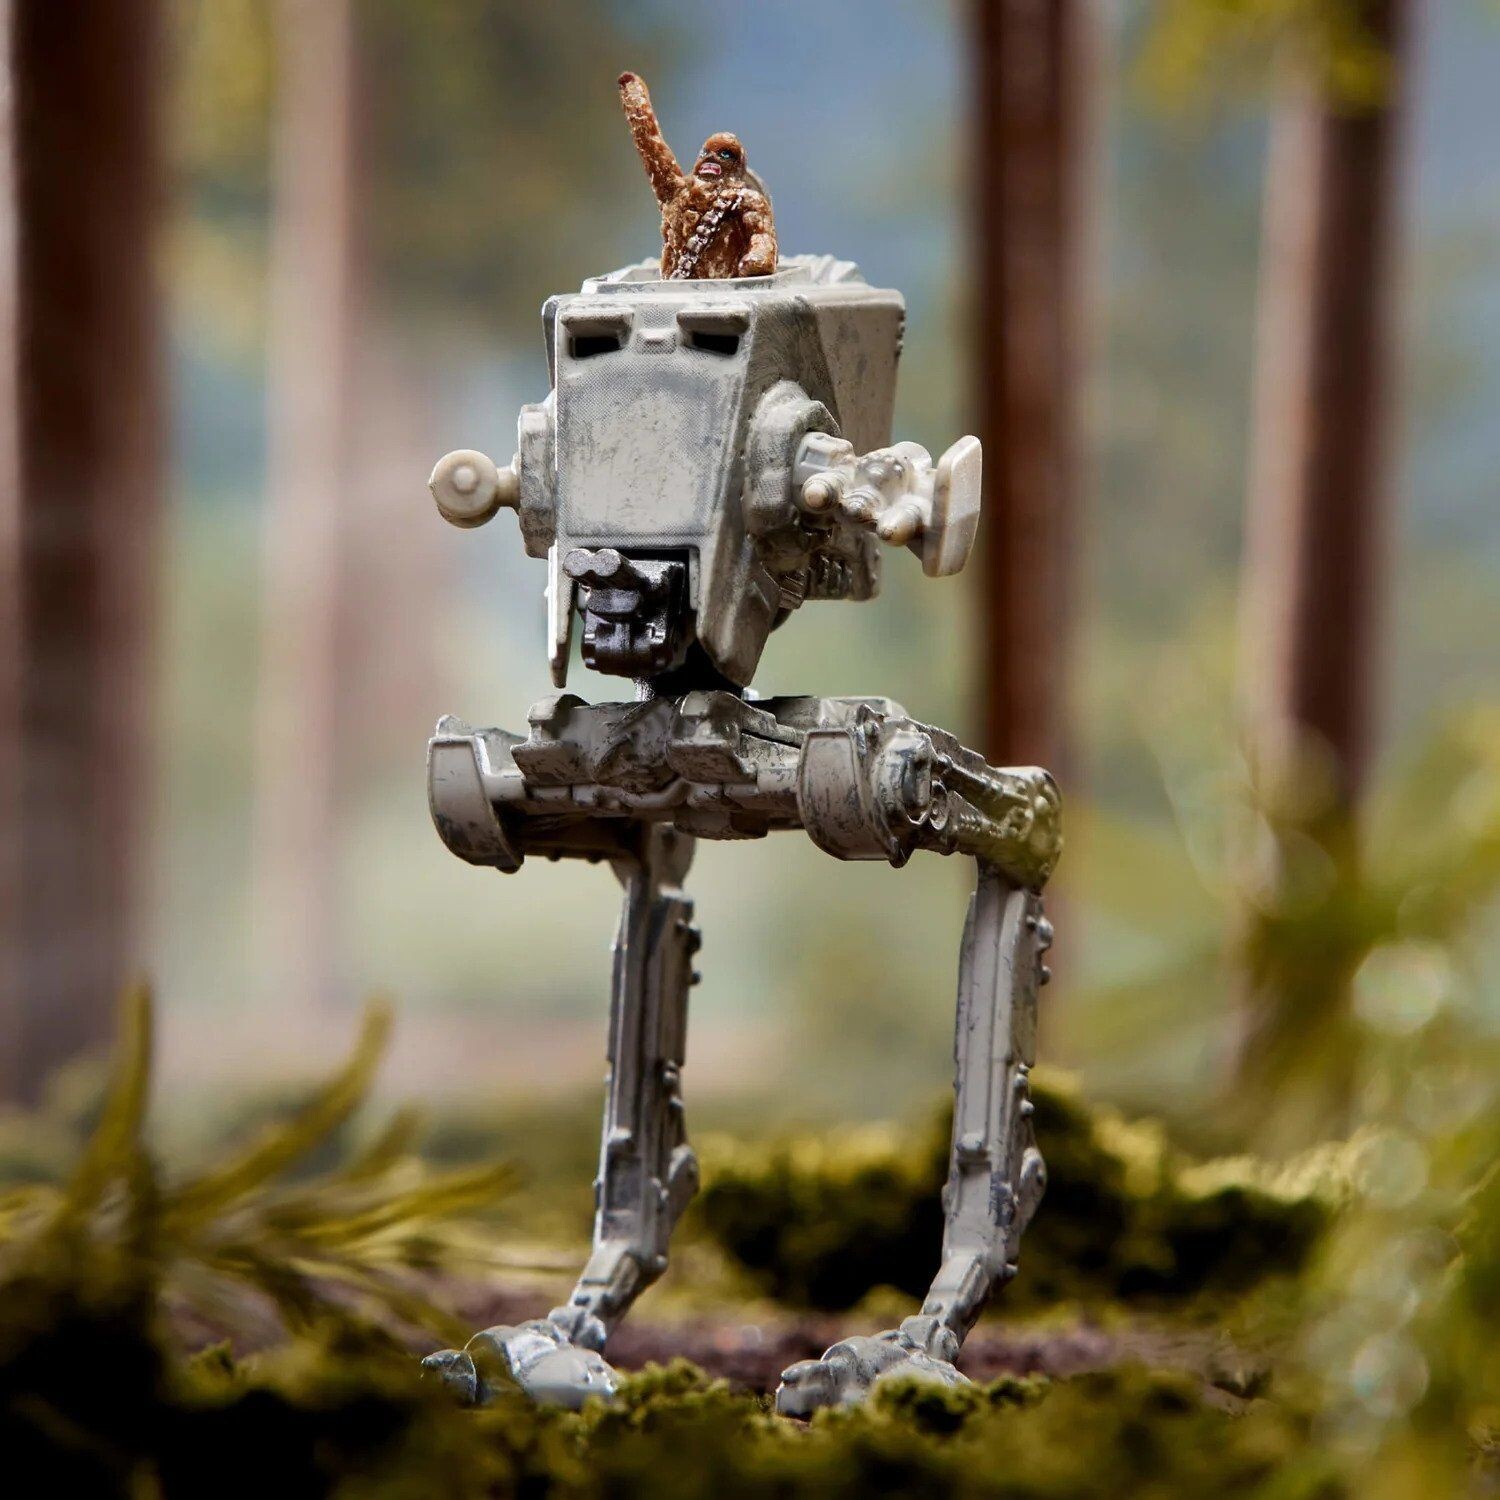 Mattel Creations Star Wars Return of the Jedi AT-ST with Chewbacca